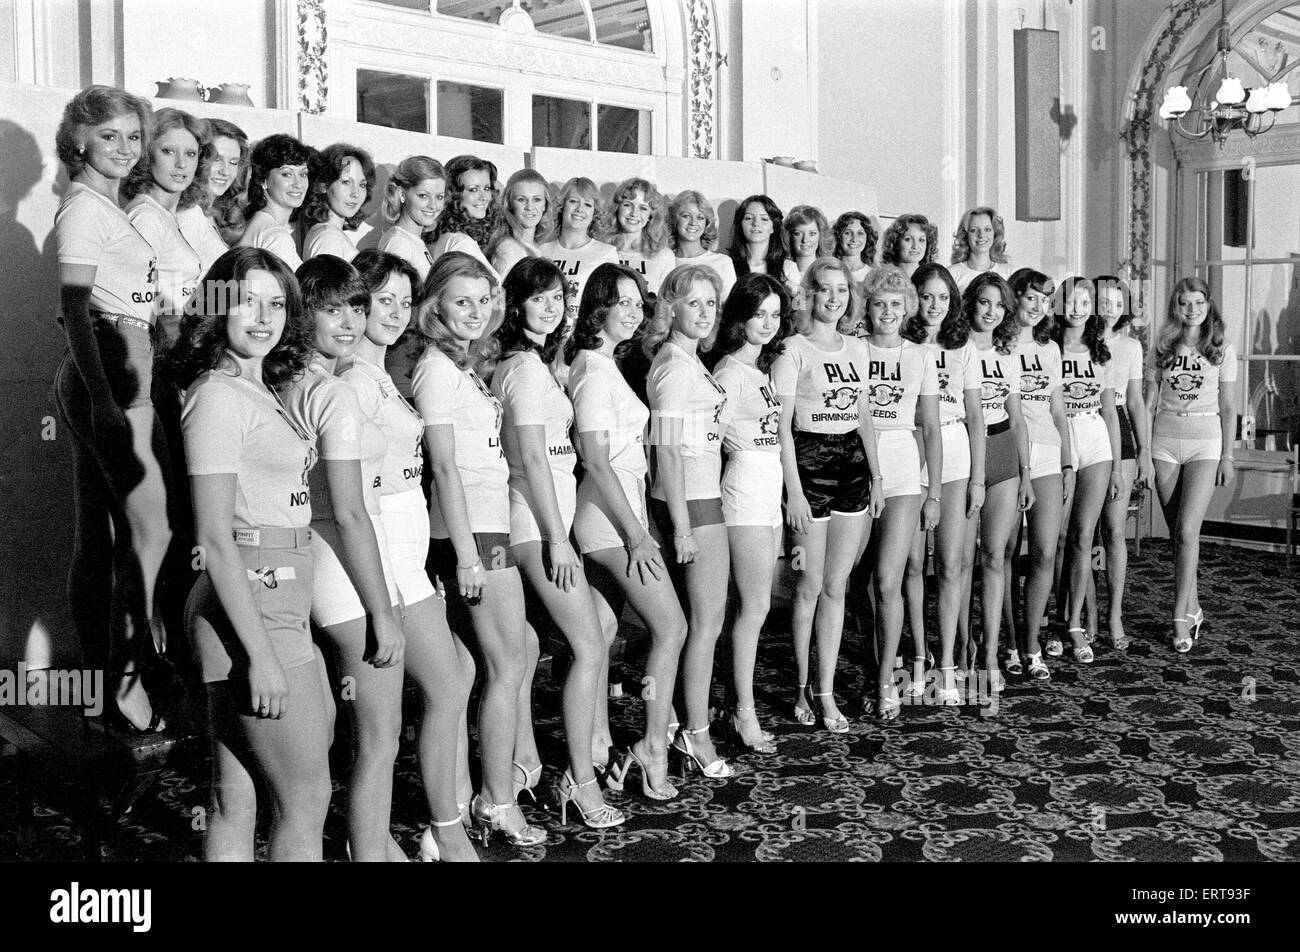 The Miss England 1978, featuring Patricia Morgan (front row 10th from left) line up takes place at The Lyceum Ballroom, 4th April 1978. The contest will be held tomorrow front row L-R Julie Reynolds, Beverley Isherwood, Jasmin Stanbridge, Carol Vincent, Susan Cockett, Janet Noris, Jaclyn Robinson, Jacqueline Davies, Julie Rose, Patricia Morgan, Linda Hart, Debbie Mason-Lee, Debbie Askew, Angie Butler, Rita Madison and Yvonne Hargreaves Stock Photo